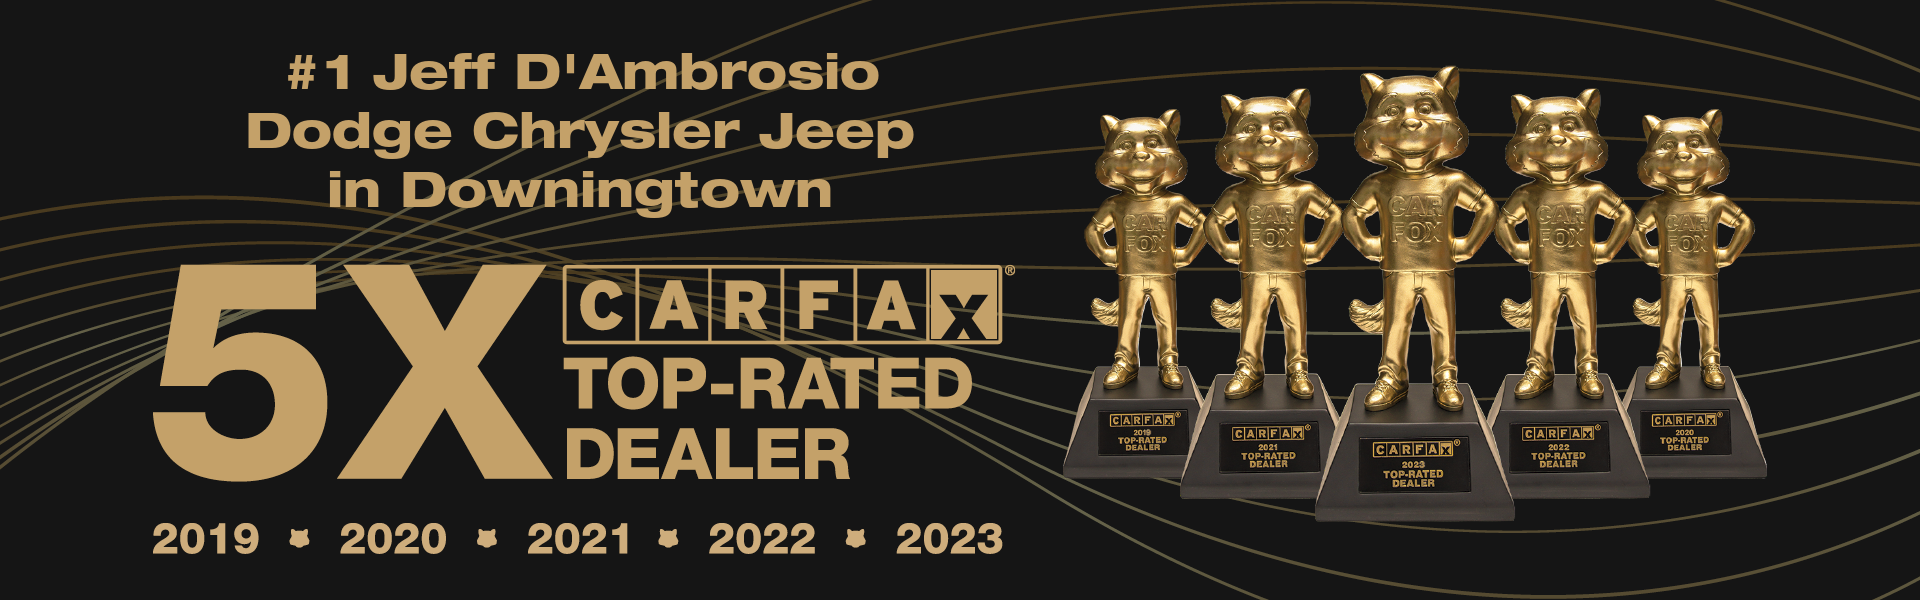 We Are a 5x CarFax Top-Rated Dealer!